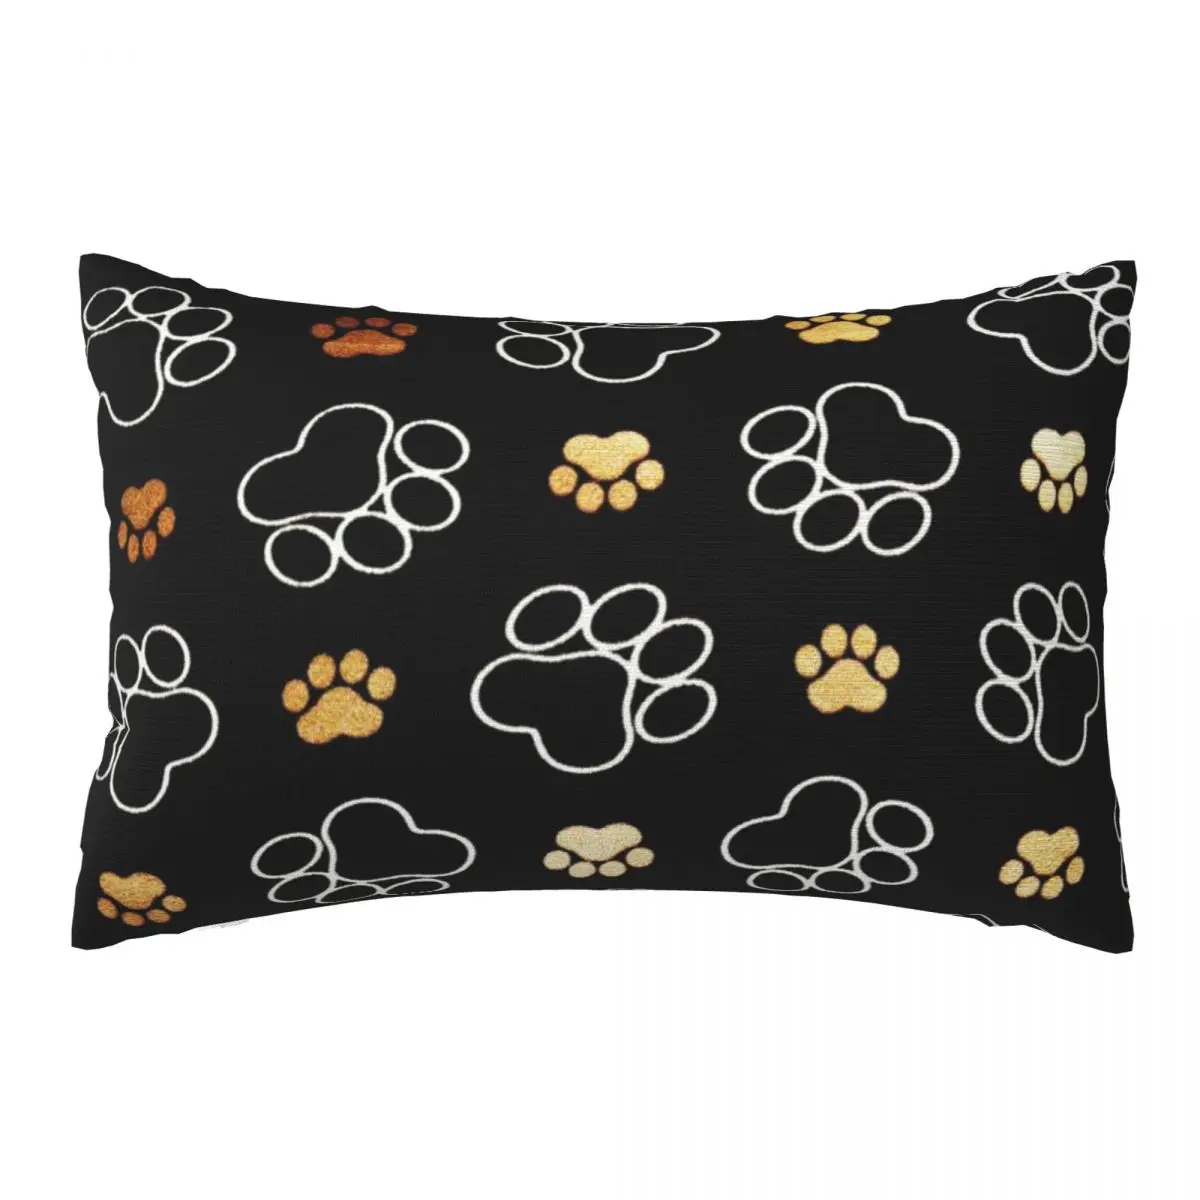 

Dog Paw Decorative Pillow Covers Throw Pillow Cover Home Pillows Shells Cushion Cover Zippered Pillowcase